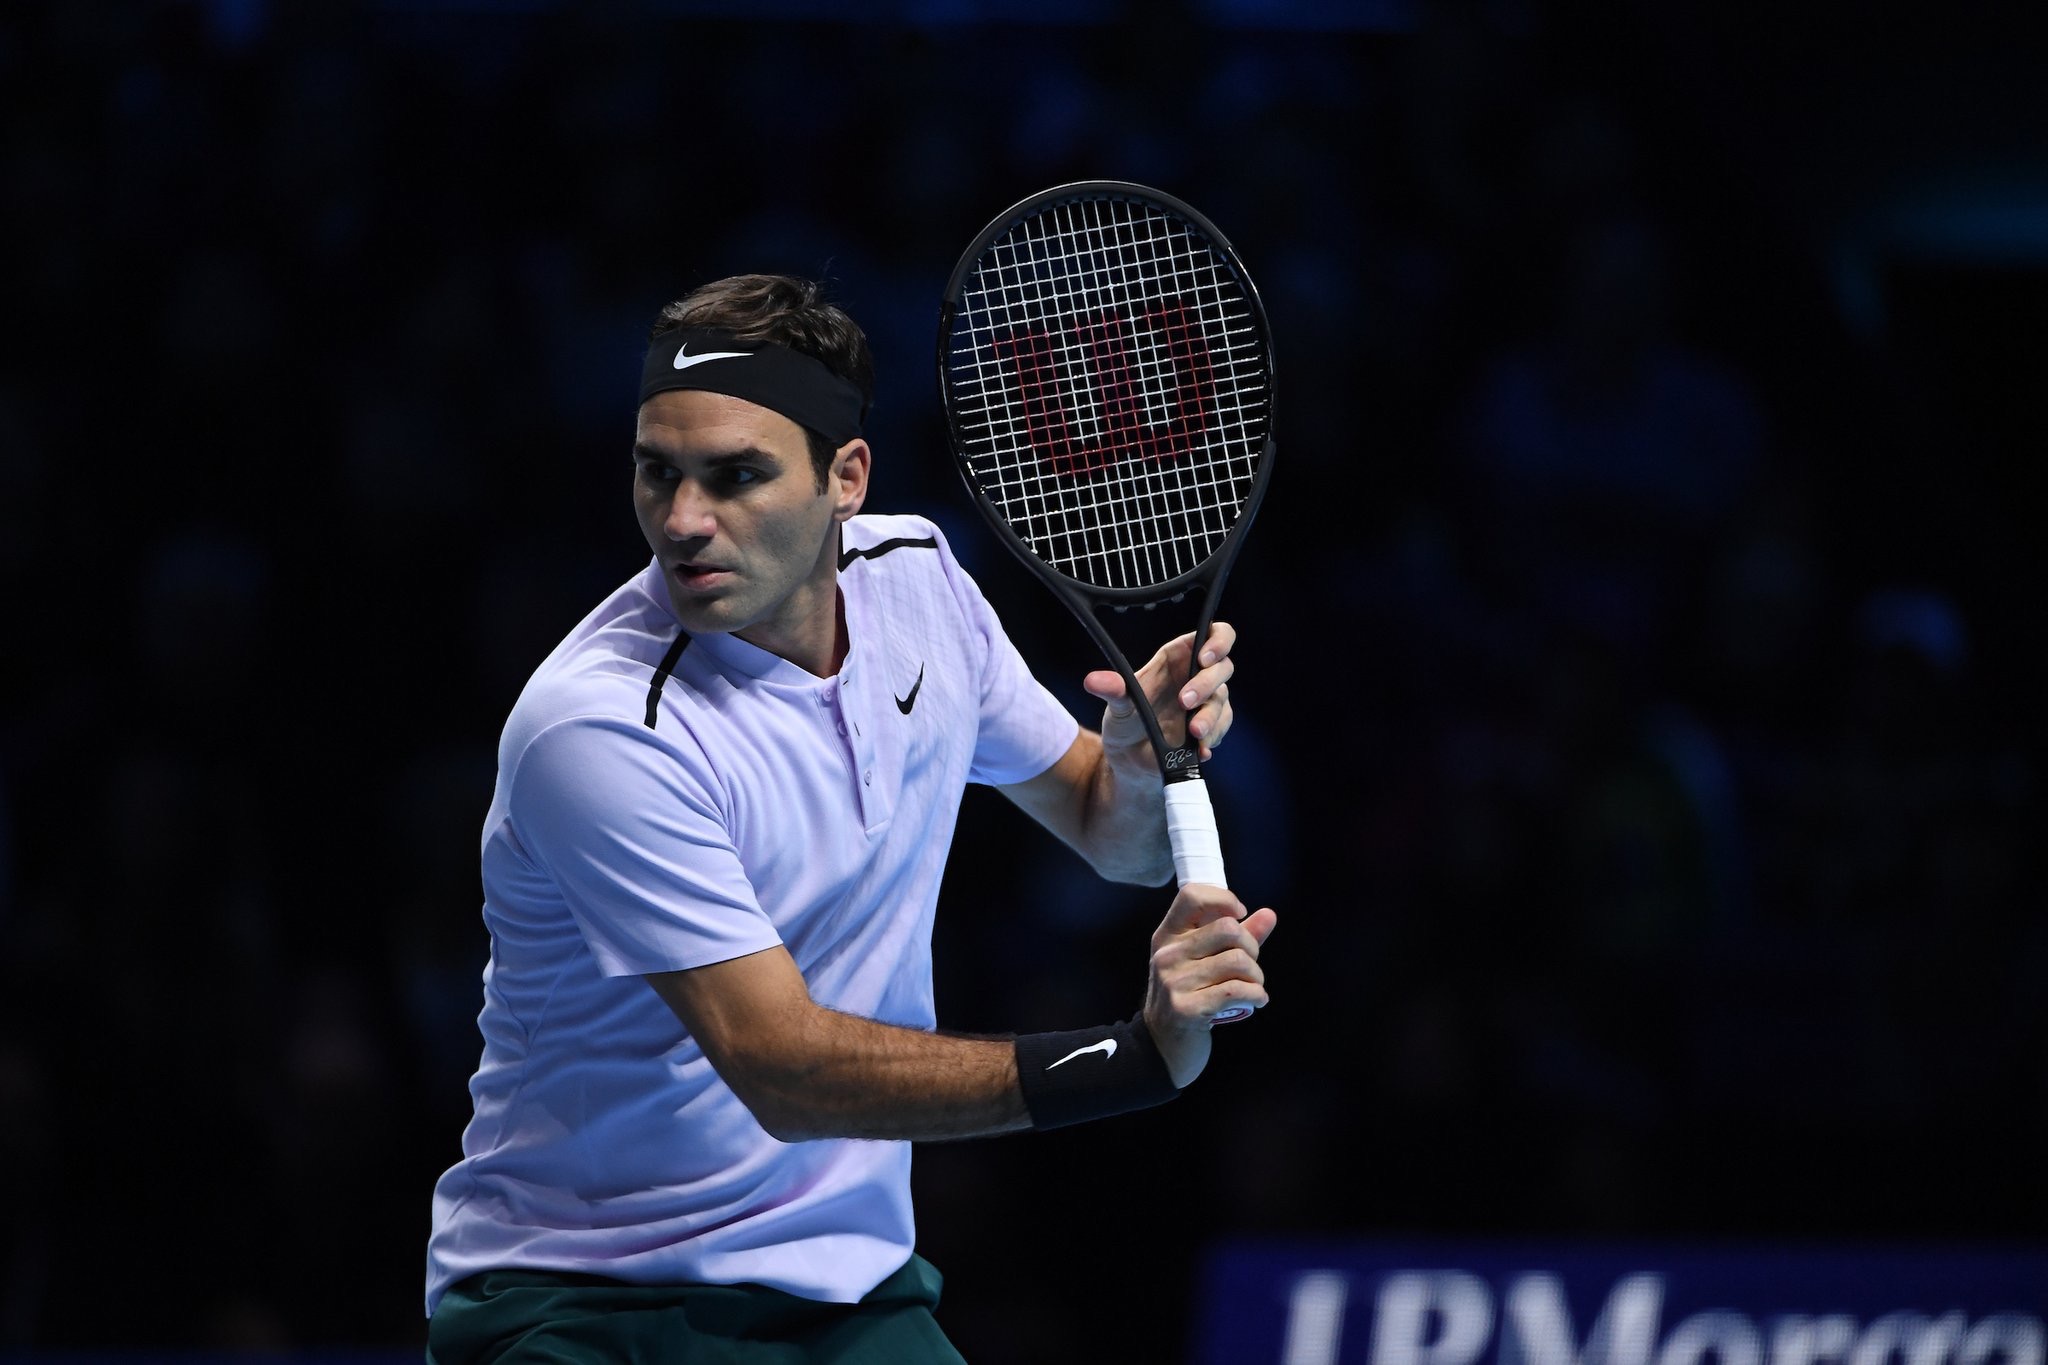 Roger Federer 2017 Nitto ATP Finals - Federer Defeats Cilic to Stay Unbeaten at ATP Finals